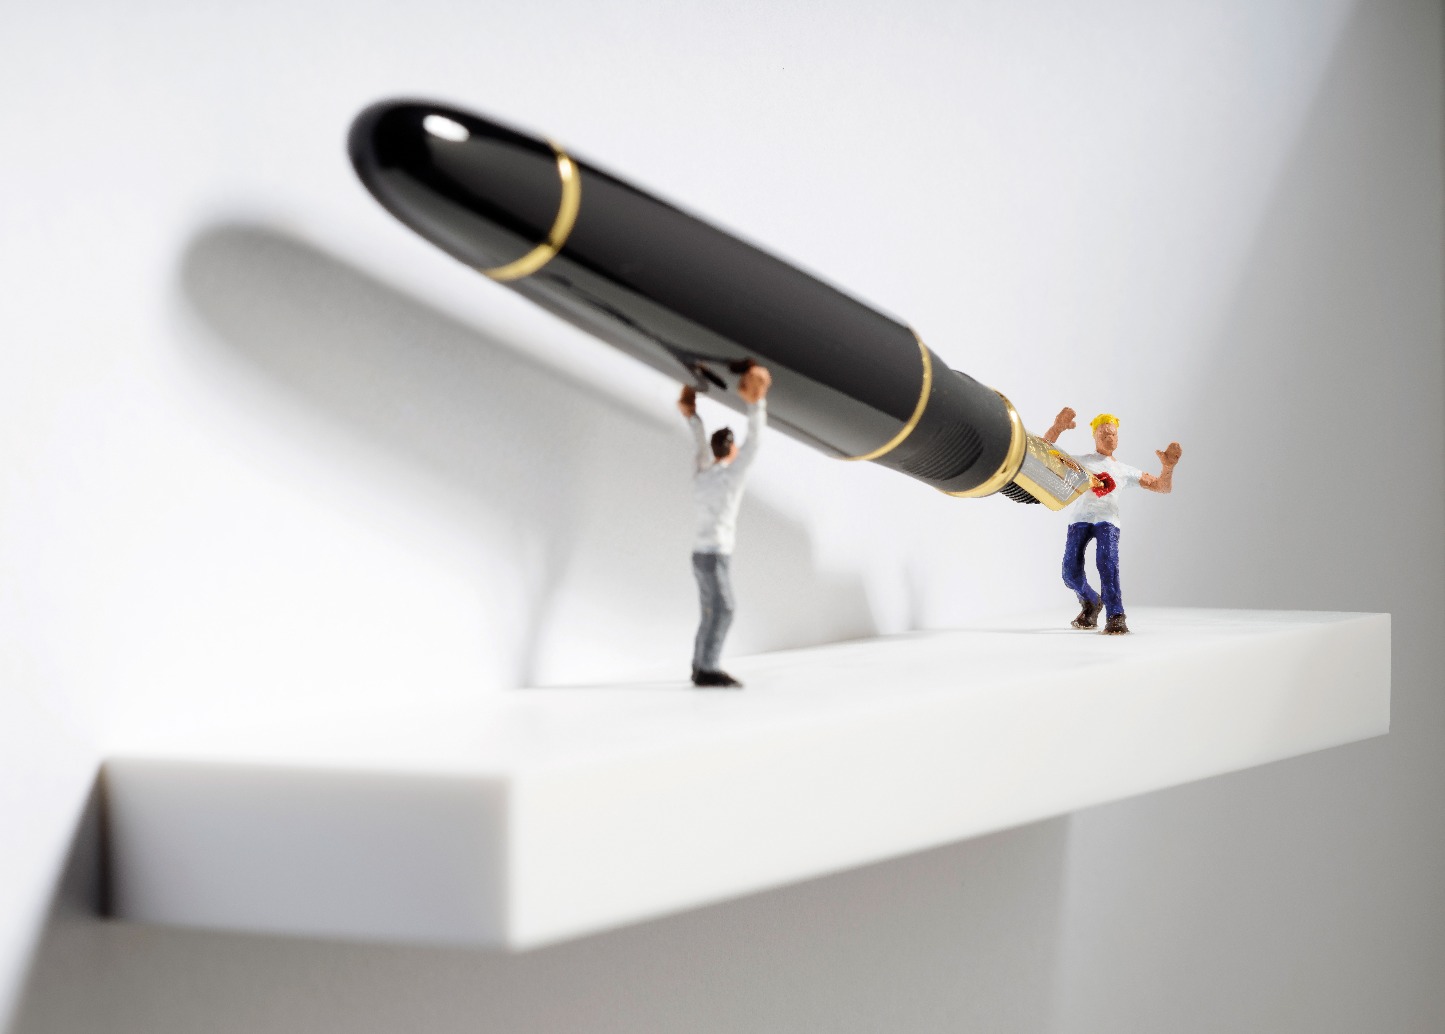 The Pen is Mightier than the Sword by Nic Joly, Humour | Sculpture | 3D